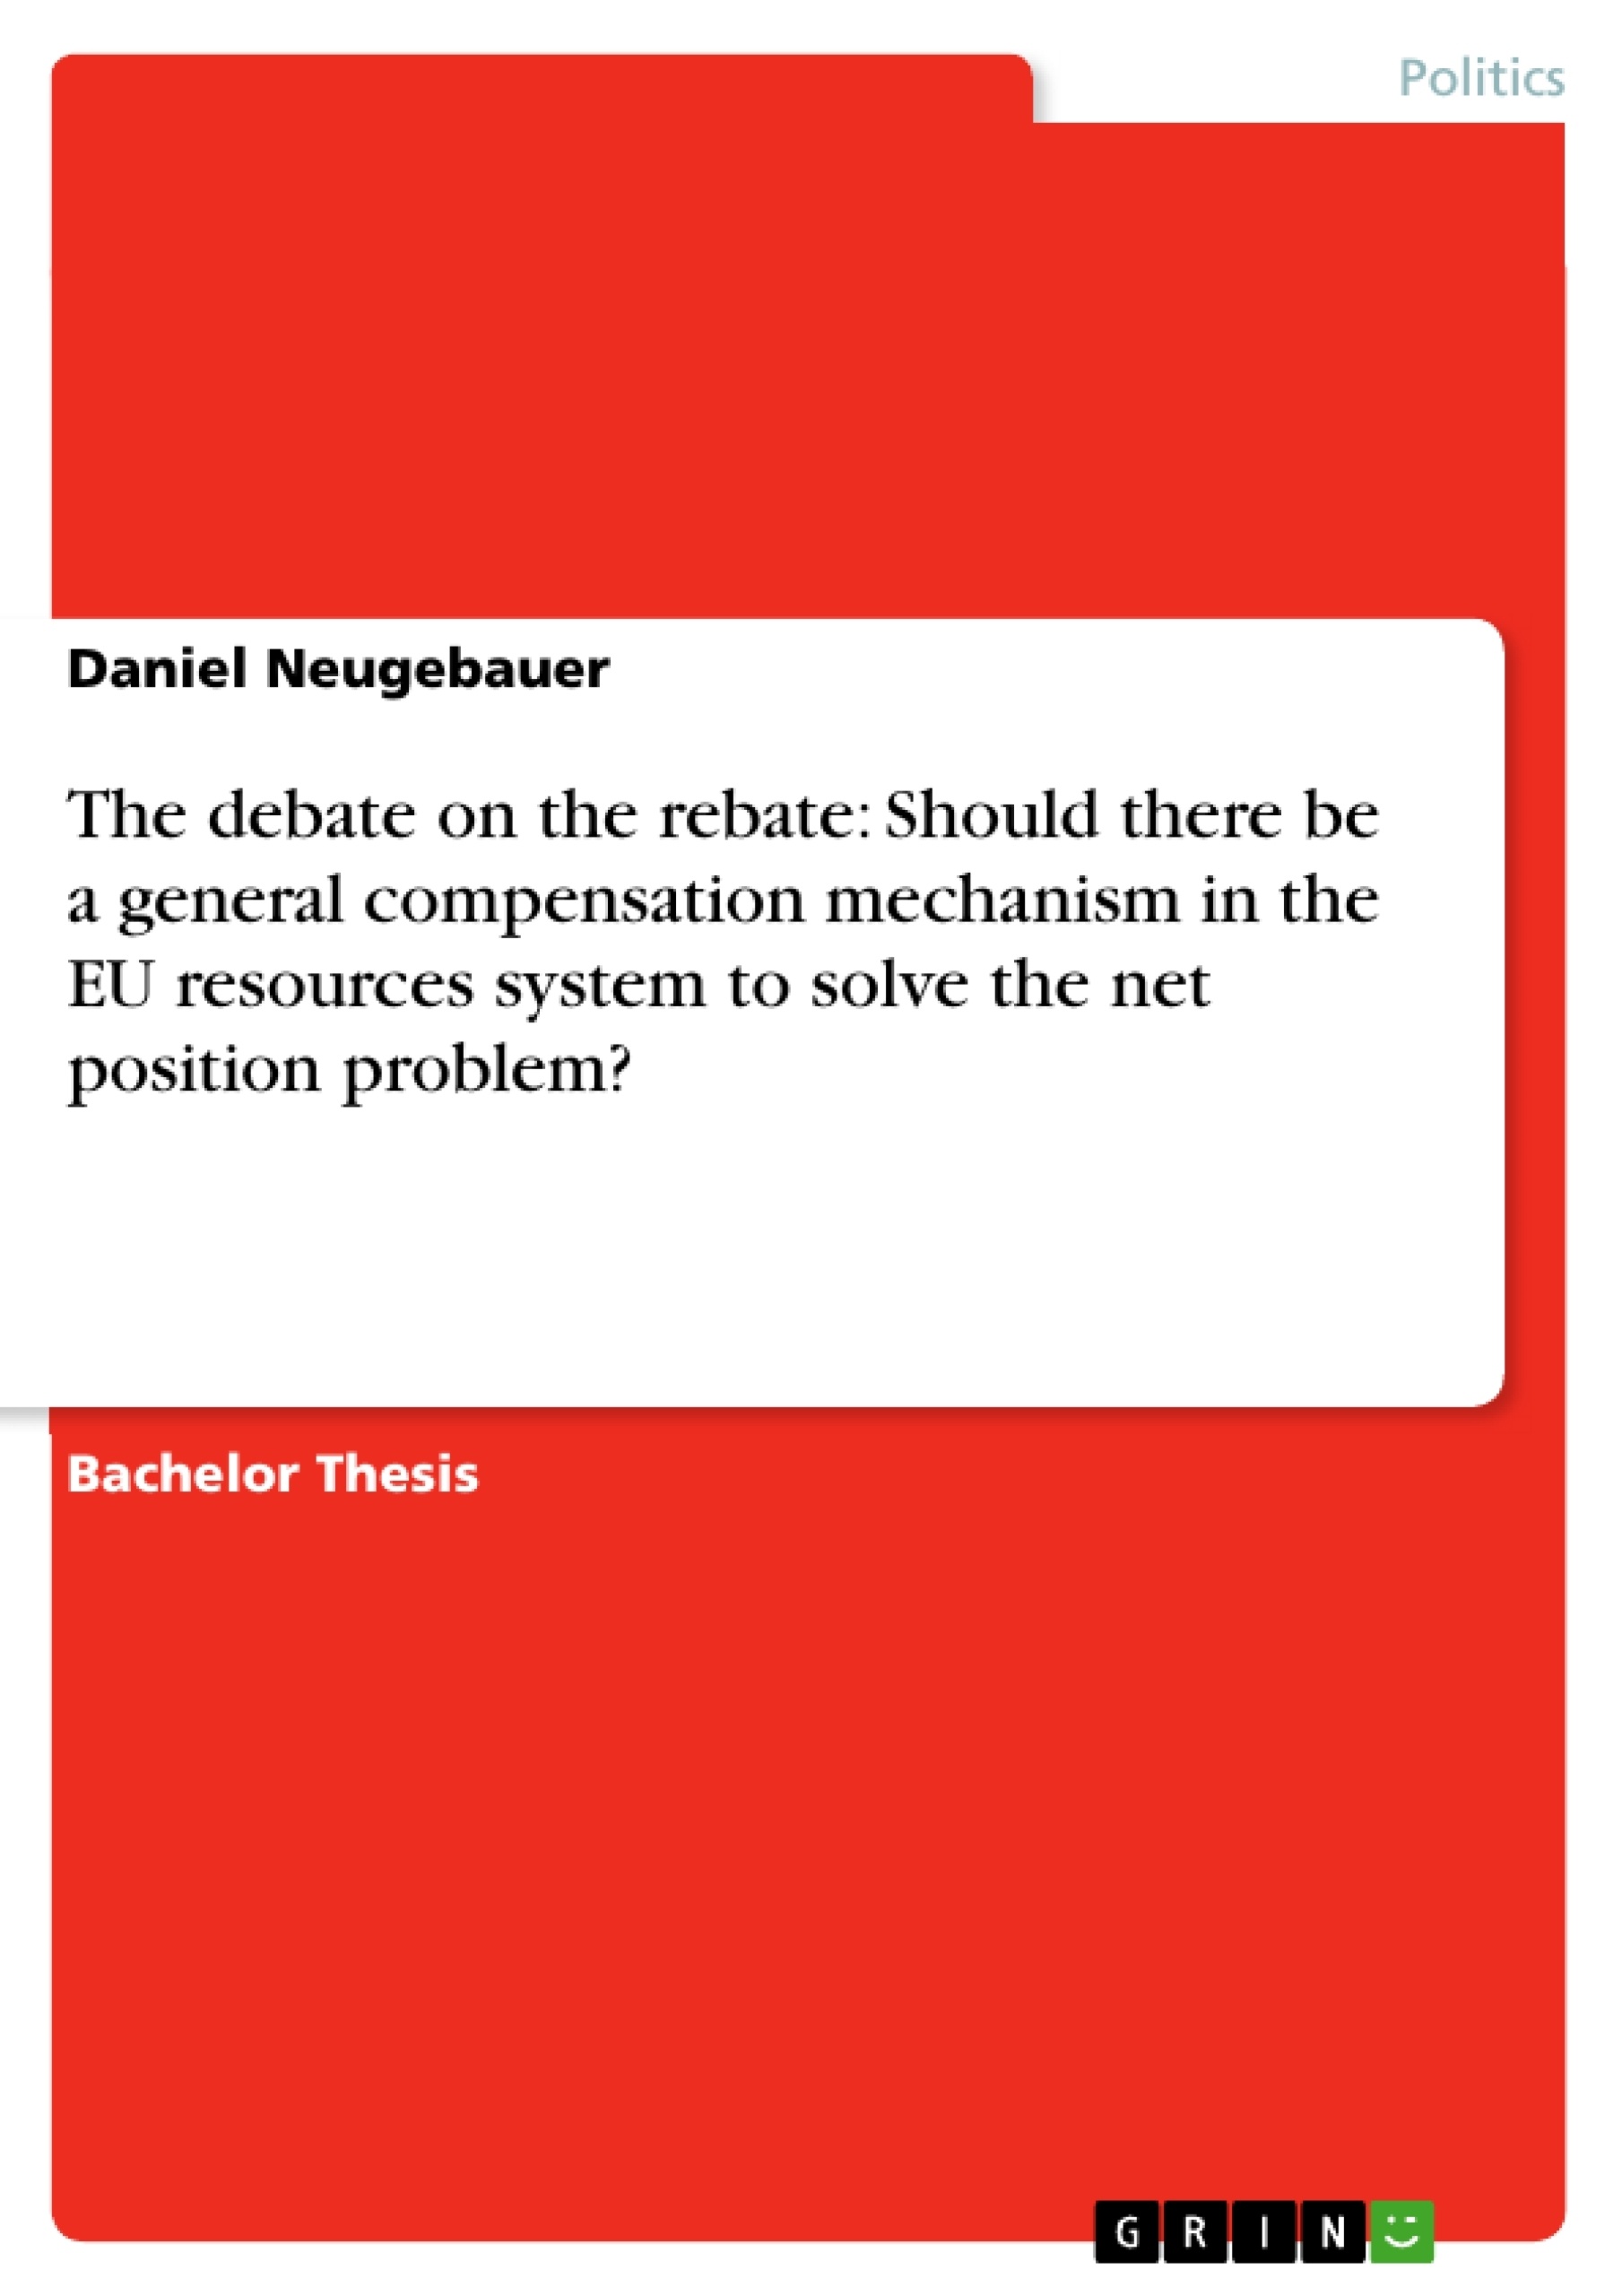 Title: The debate on the rebate: Should there be a general compensation mechanism in the EU resources system to solve the net position problem?